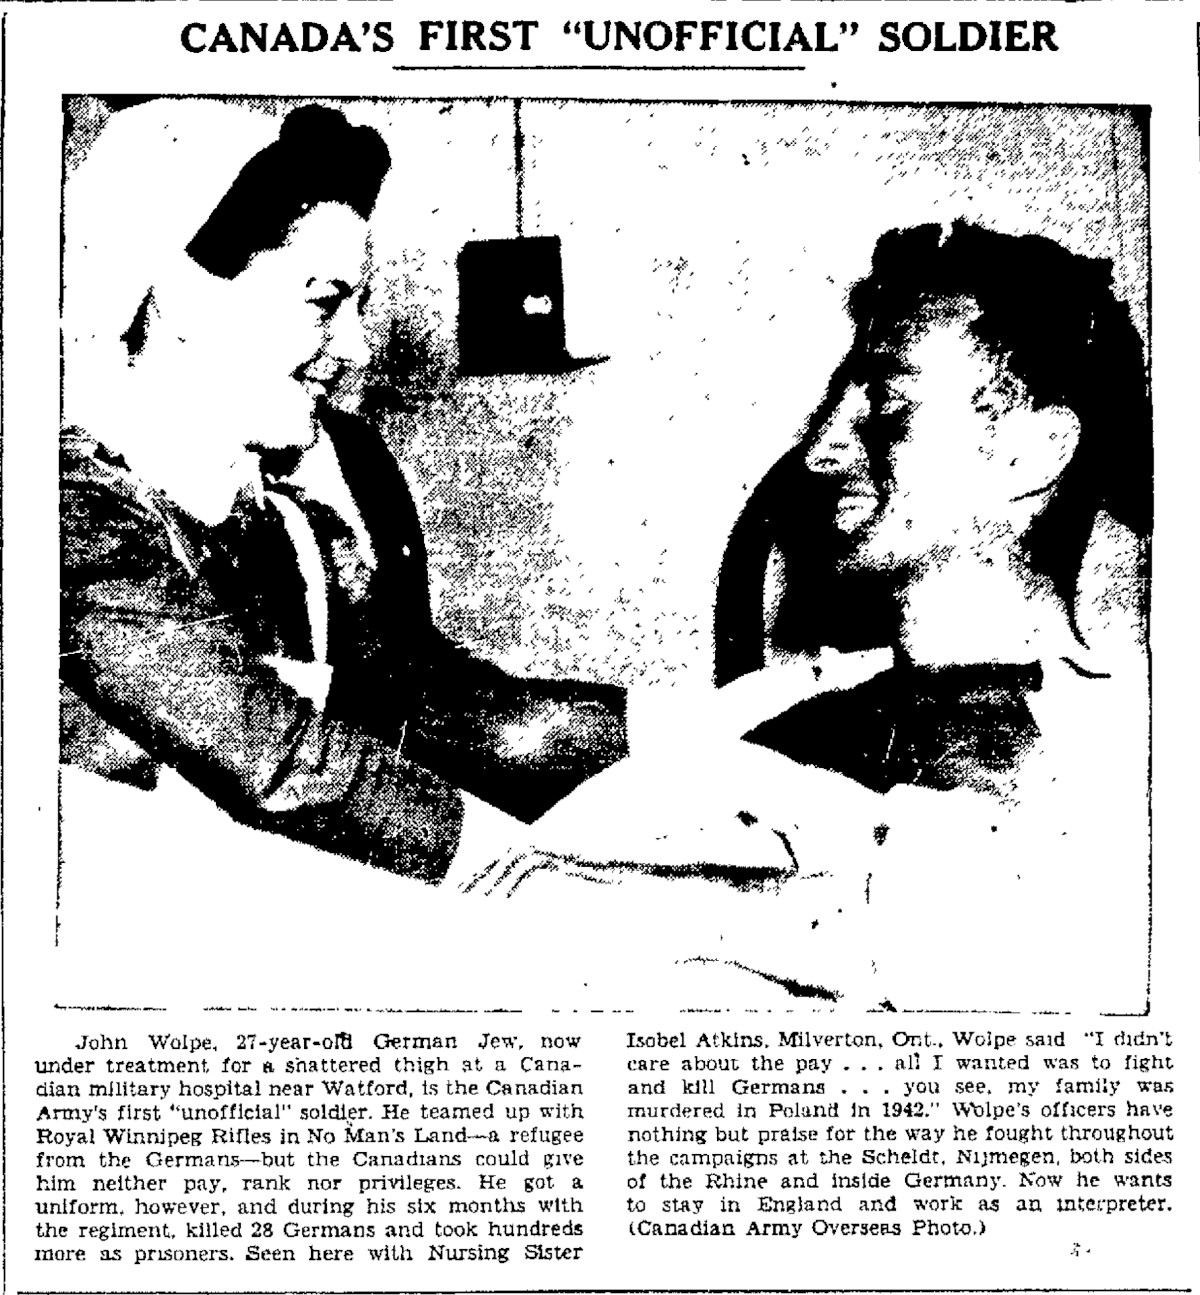 Wolpe recovering in hospital in England. // Lethbridge Herald, July 17, 1945, p. 5.